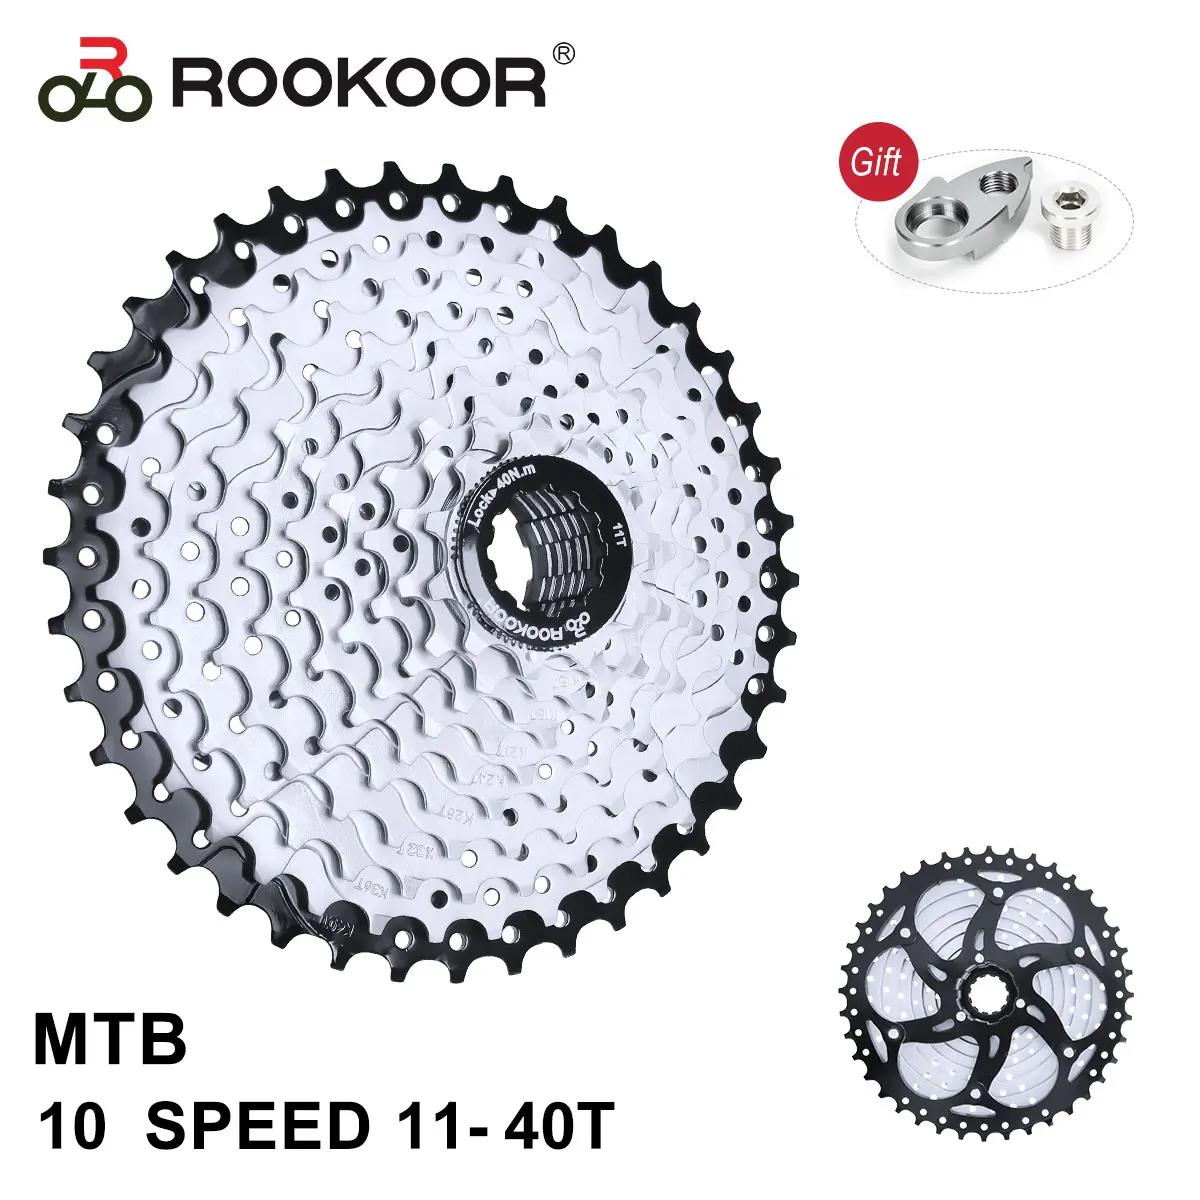 

Rookoor 10 Speed Bicycle Cassette Freewheel MTB Bike Velocidade 11-40T Sprocket Bike Accessories for SHIMANO SRAM Cycling Parts